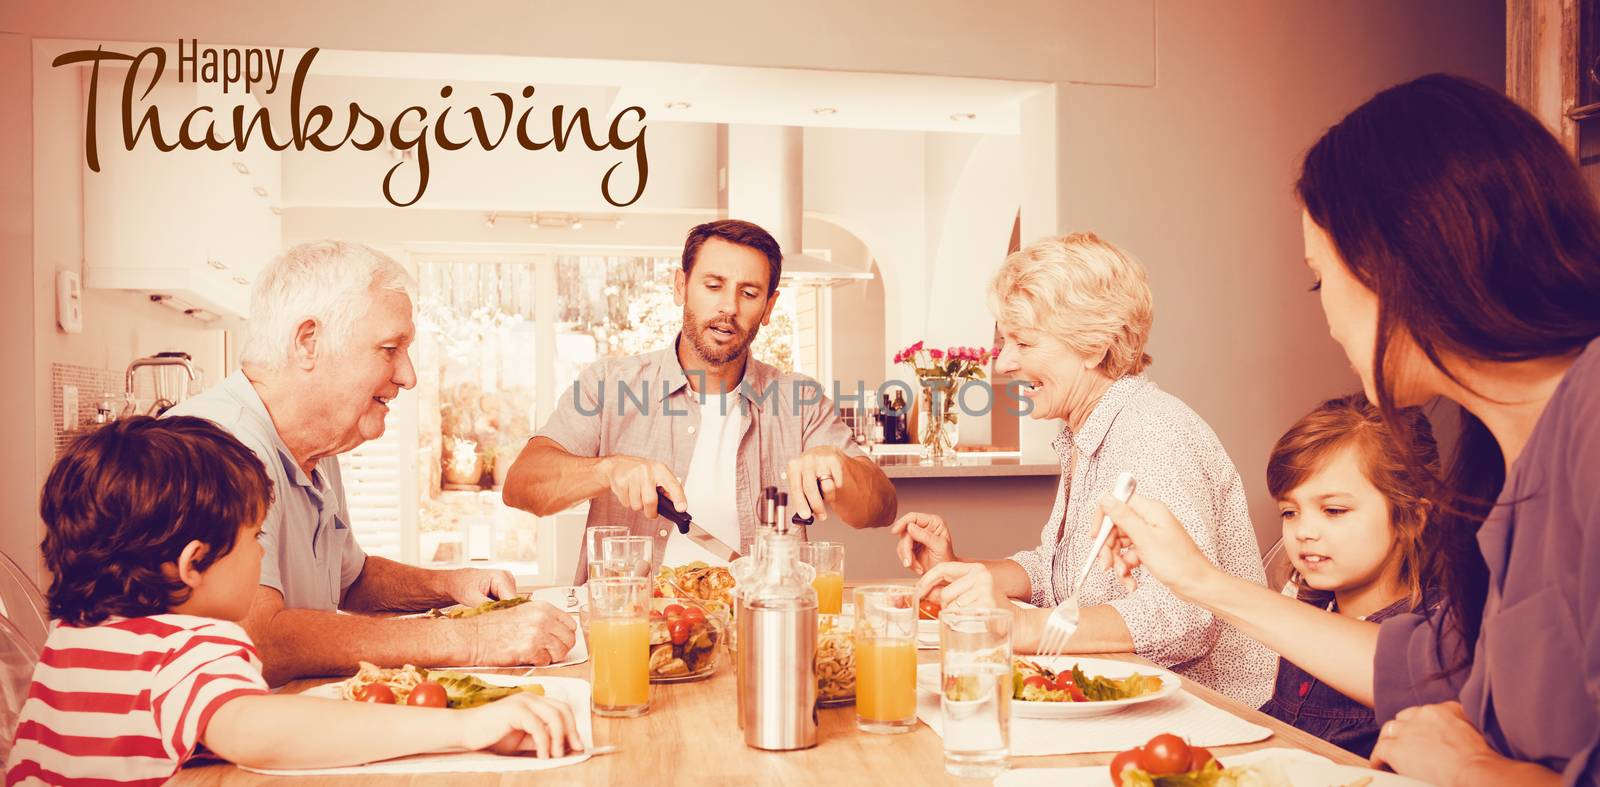 Illustration of happy thanksgiving day text greeting against happy family with grandparents sitting at dining table